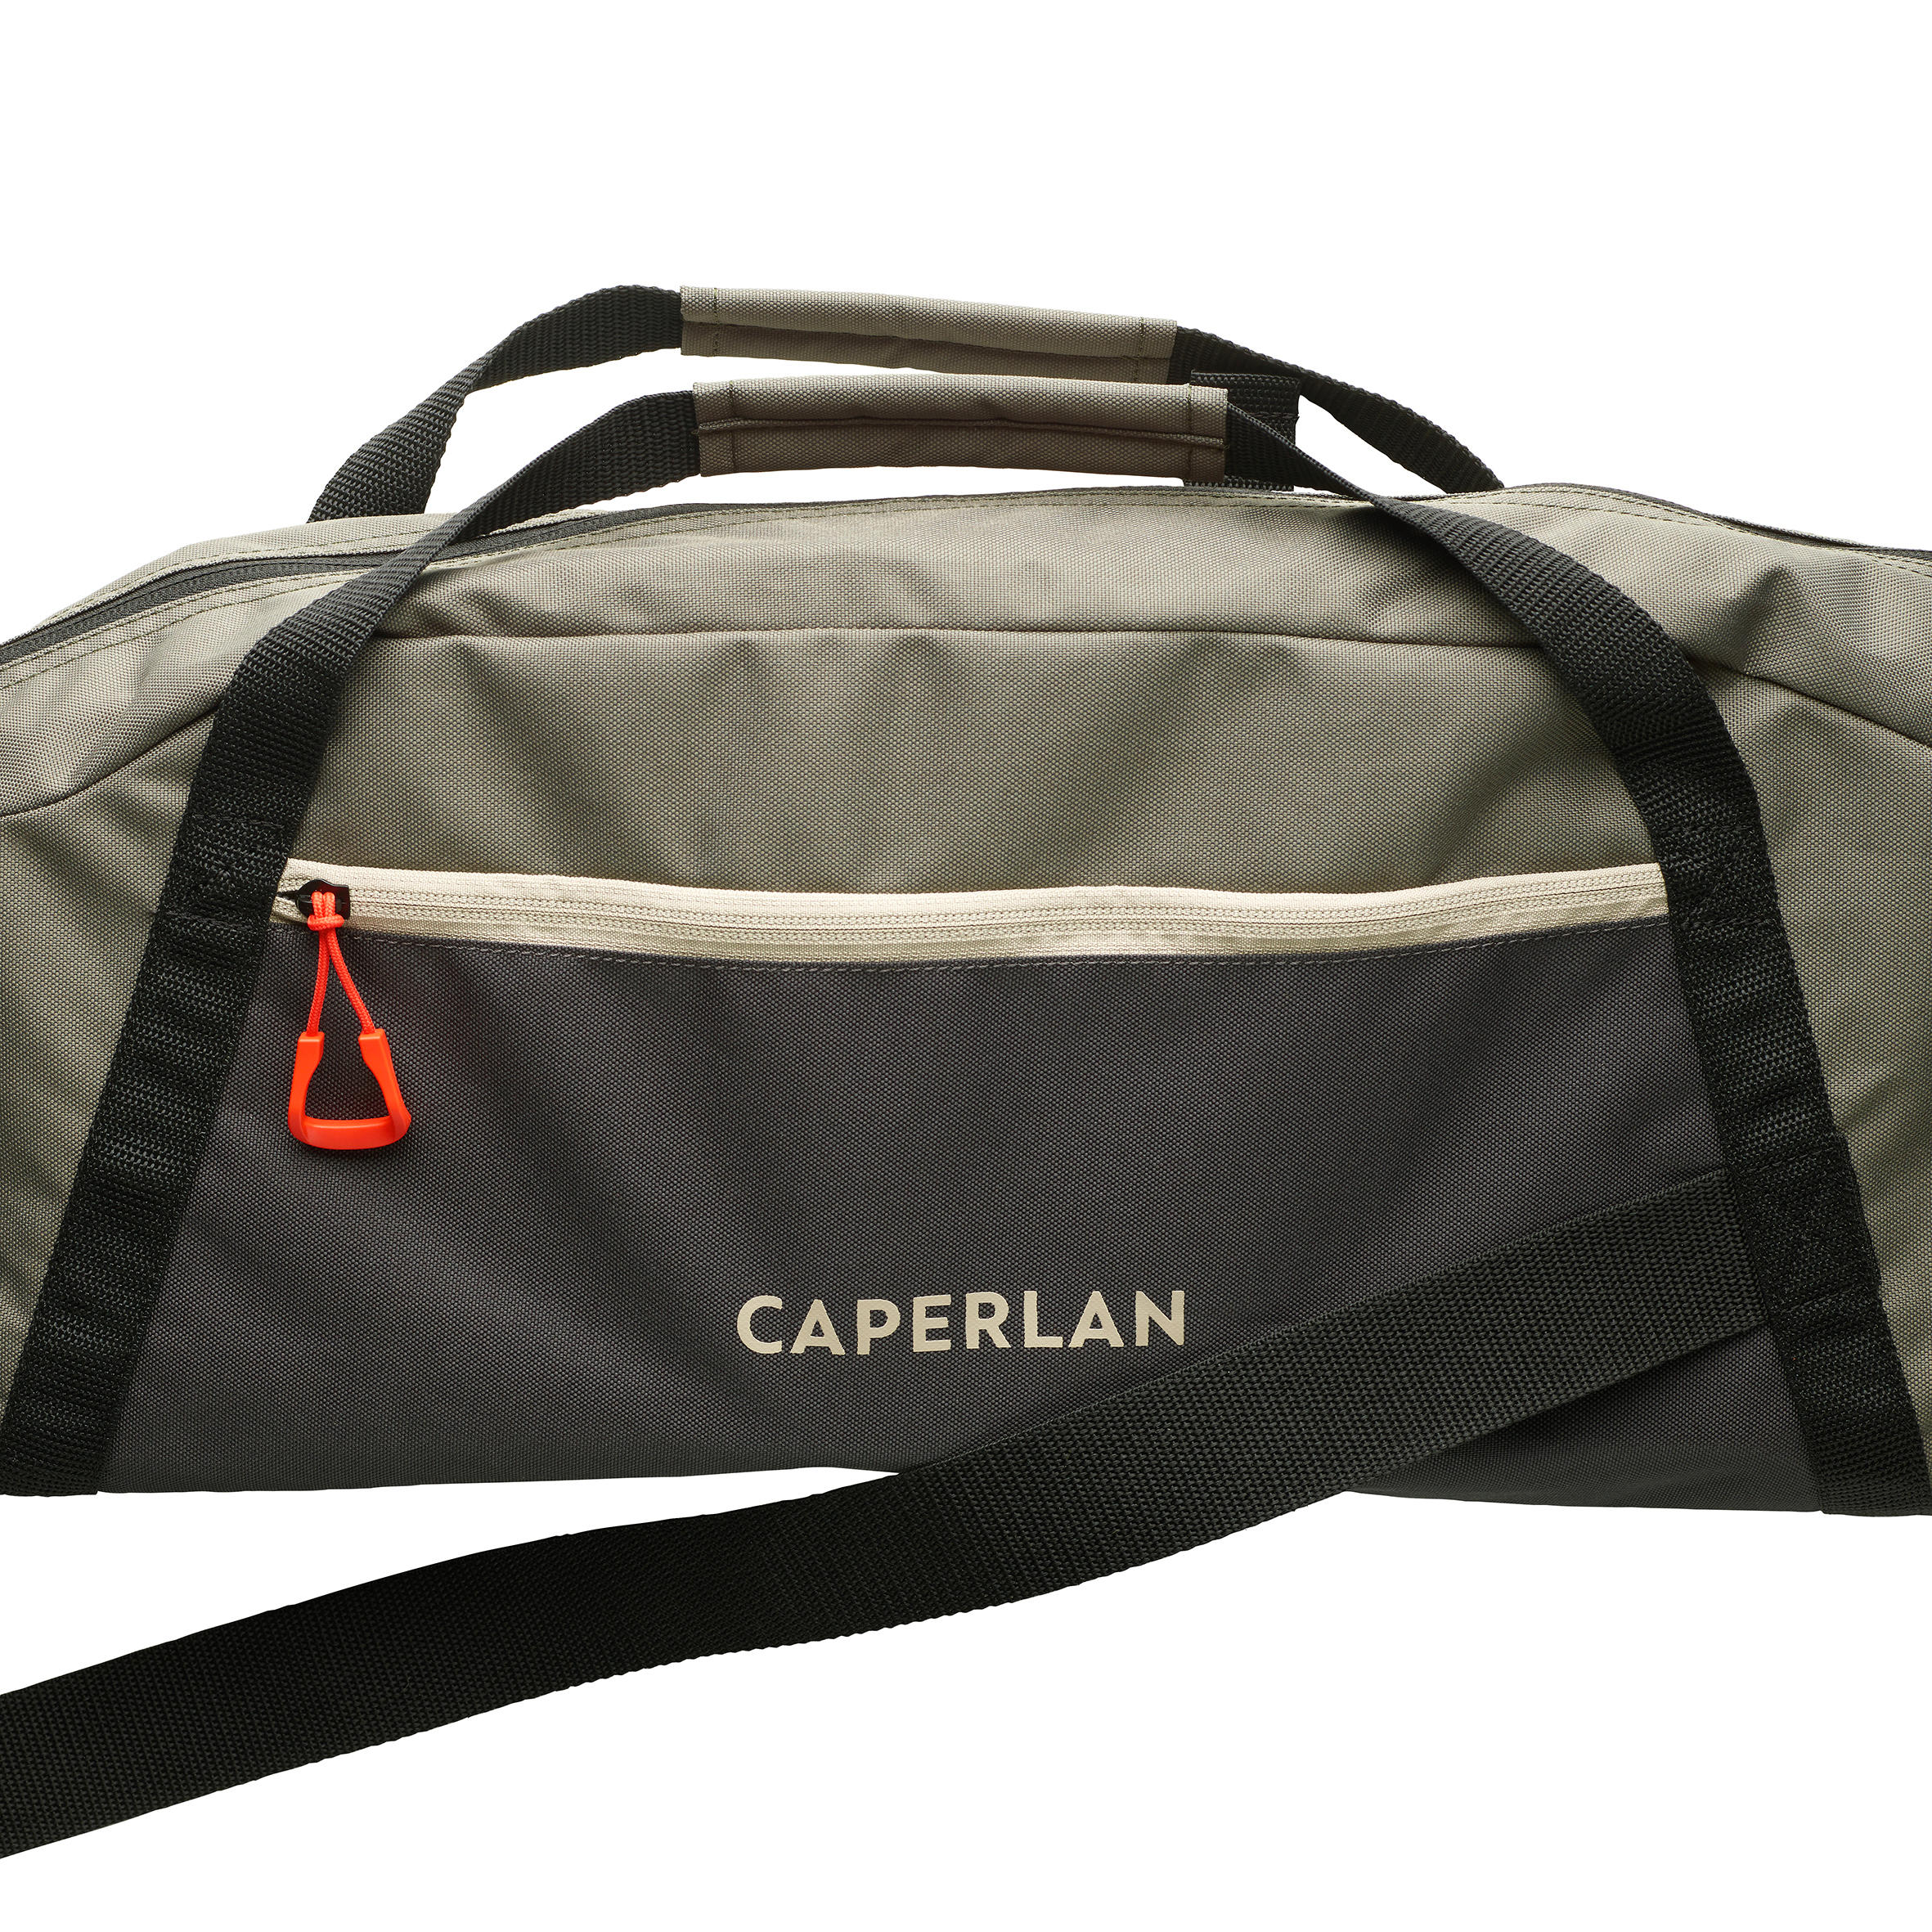 Fishing Rod Bag 100 1.4M - One Size By CAPERLAN | Decathlon